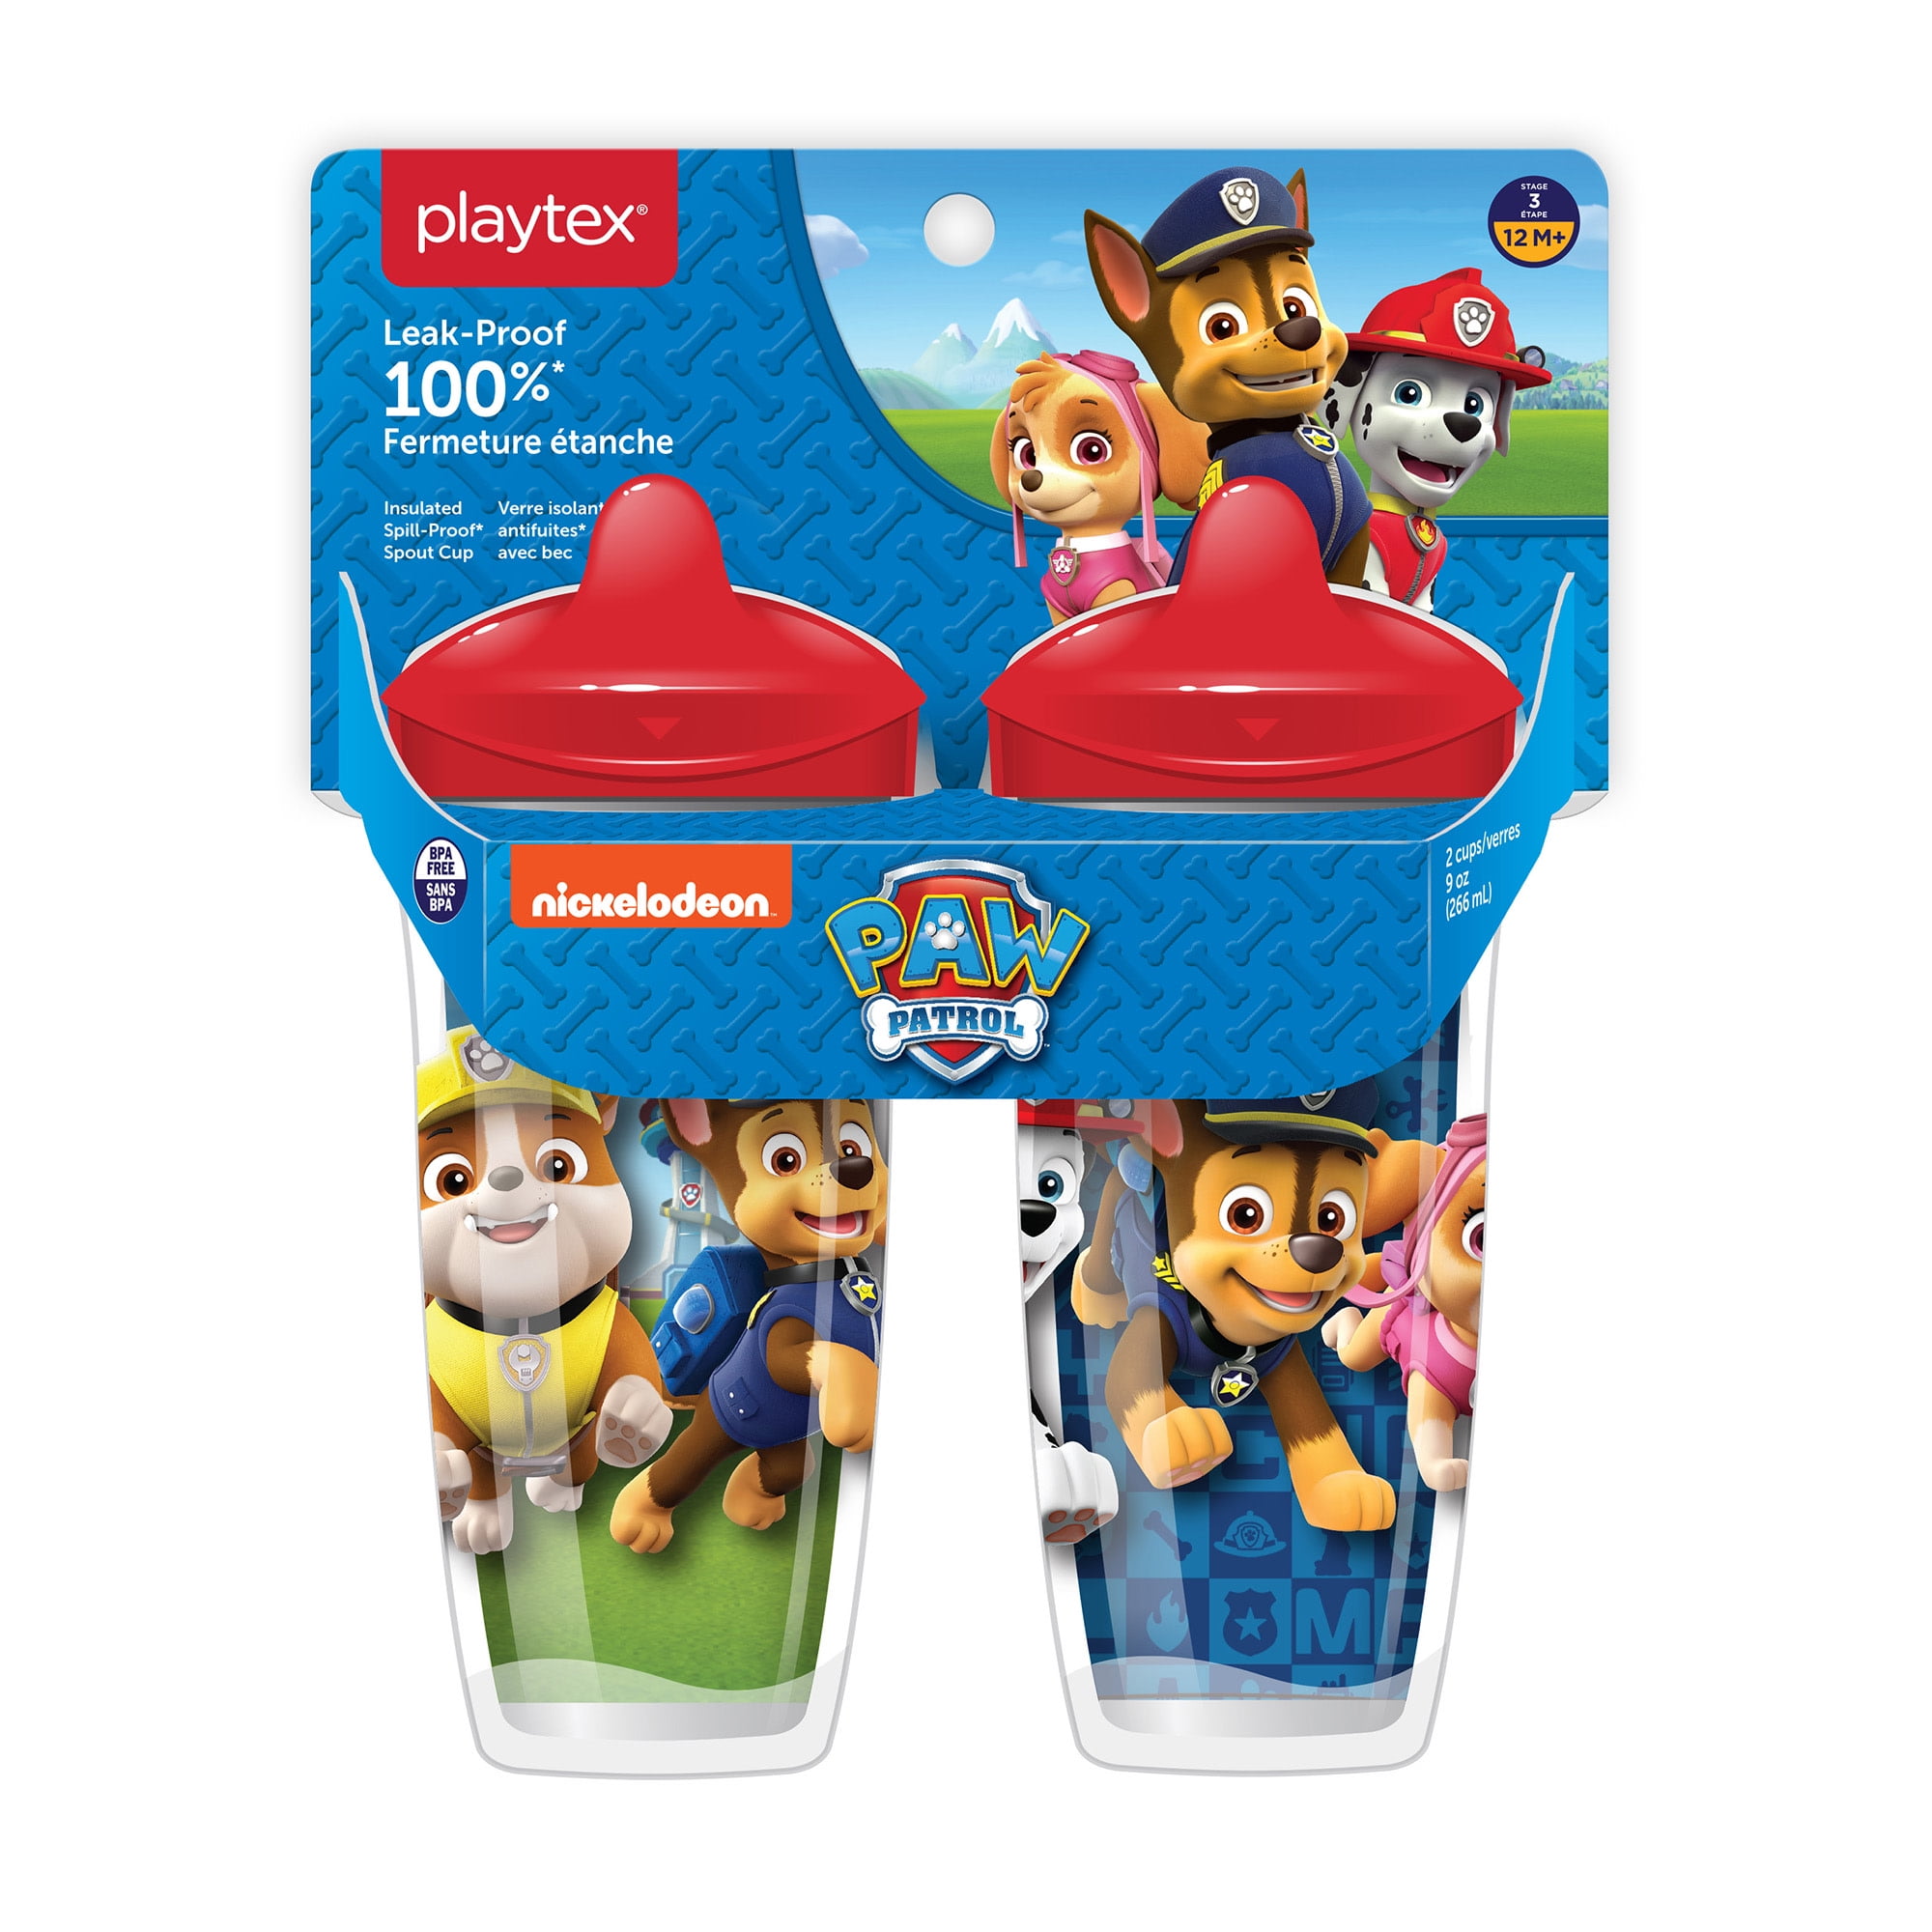 Paw Patrol Pink Sippy Cup - Toddler Drink Sipper - Skye, Rubble, Marshall